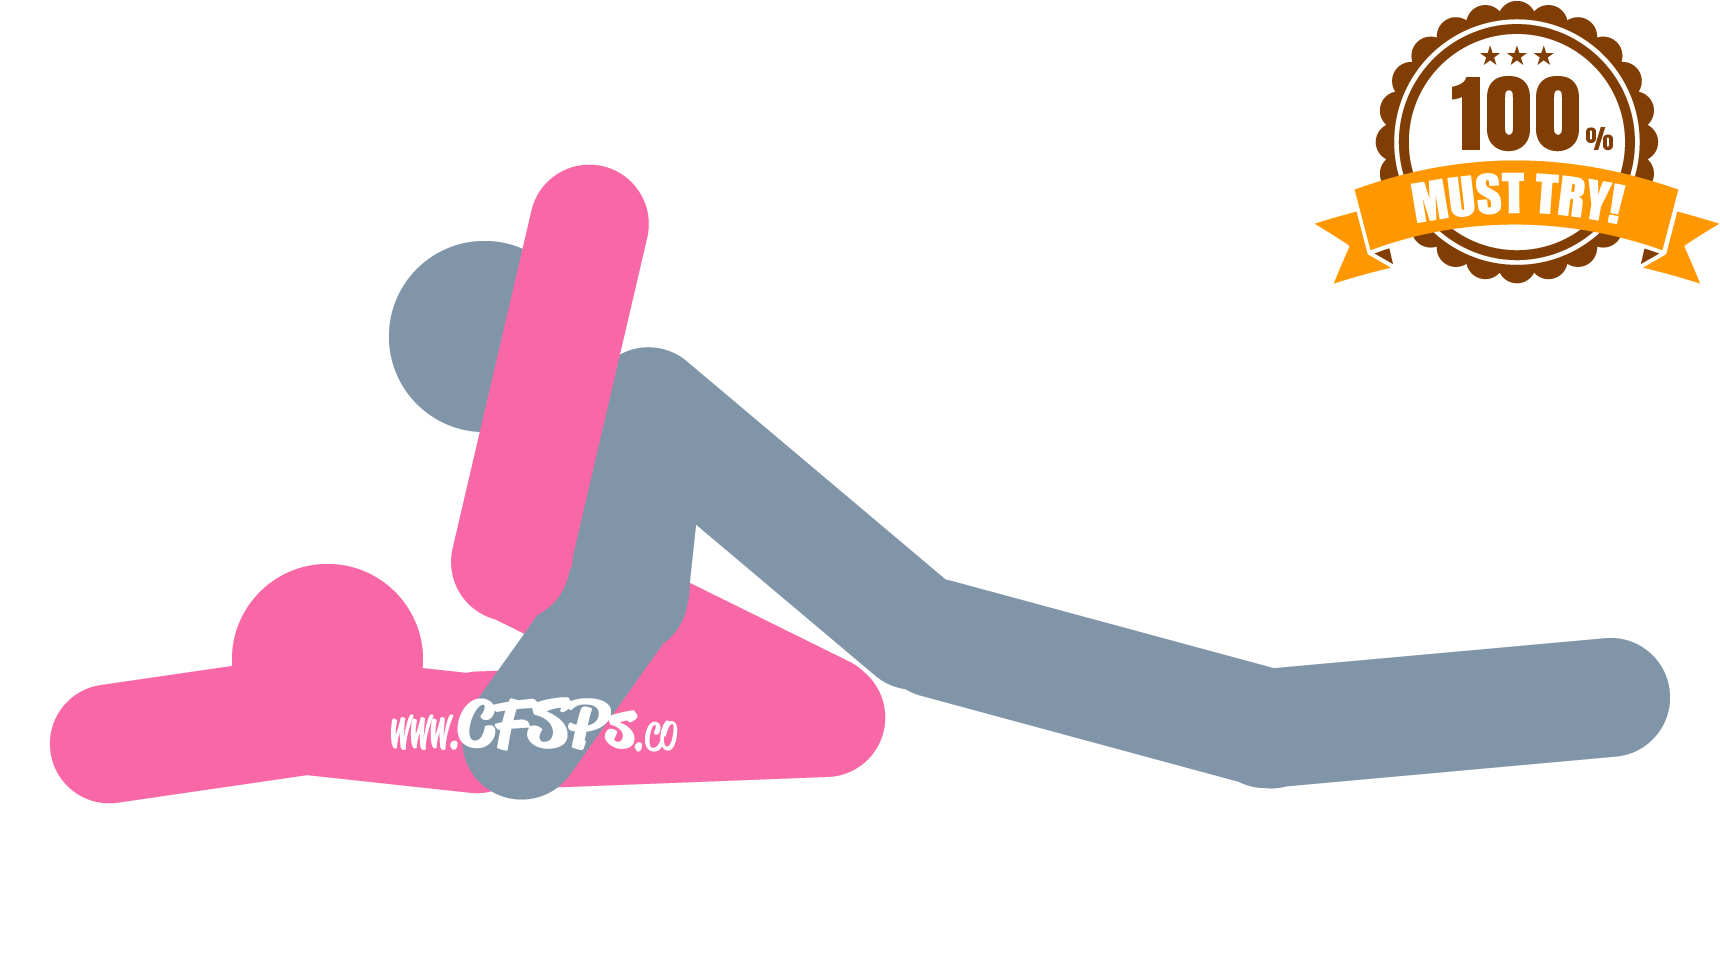 This stick figure image depicts a man and woman having sex in the Squashing the Deckchair sex position. The woman is lying on her back with her arms above her head and her knees near her chest. The man is lying on top of her between her legs with his arms supporting his body on the bed near her sides. His arms are pushing her legs back, and they are resting on his shoulders.